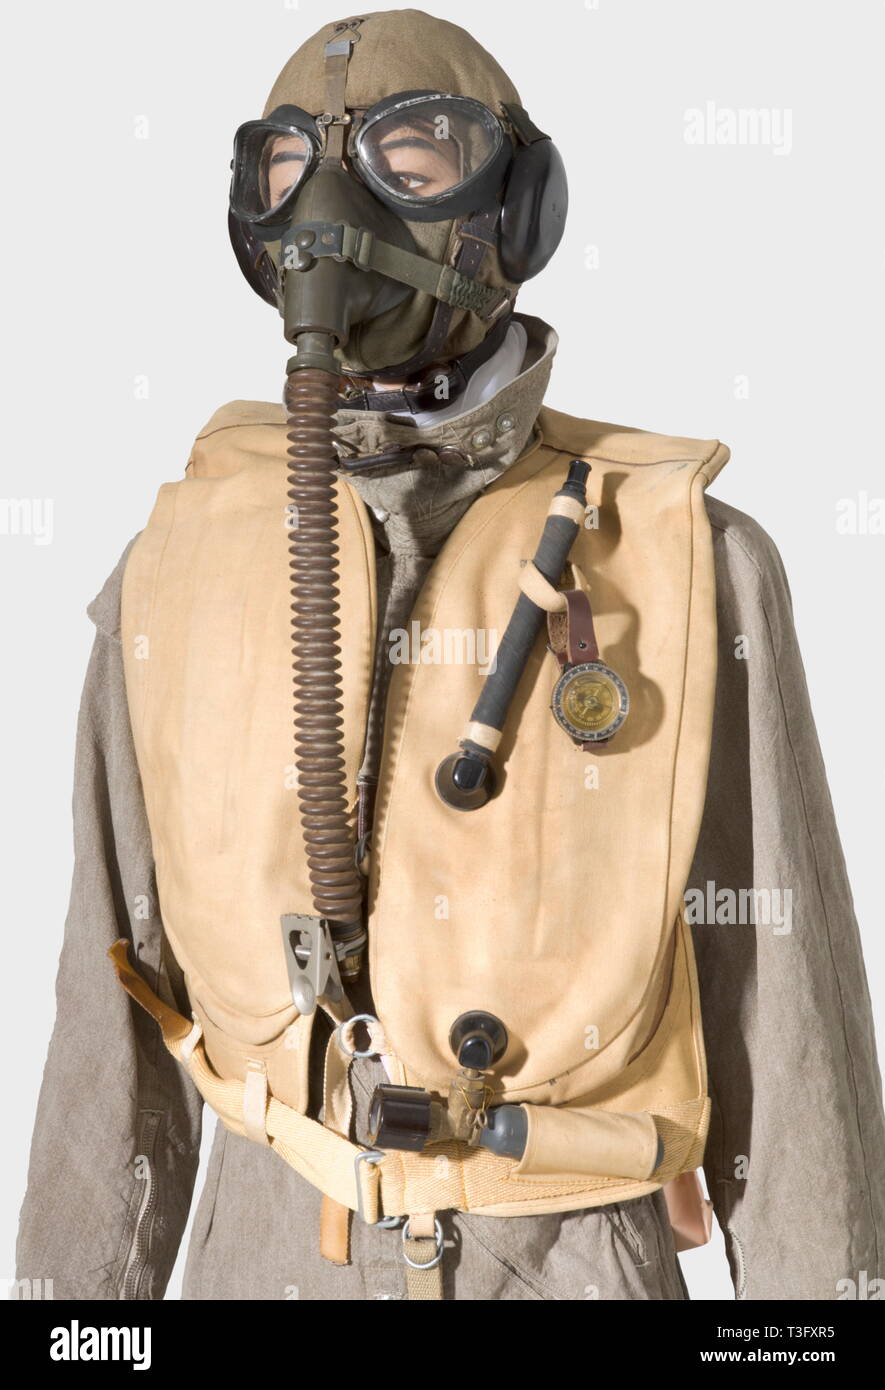 A pilot's uniform ensemble, during the aerial bombing of England, 1940 - 44 A pilot's helmet of sand-coloured linen with brown leather pieces in the very rare early version with the throat microphone on the side, type Siemens Lkp 100, Fl 31216, complete with cable and connector plug. Summer flying suit of sand-coloured linen ('Prym' buttons, 'Zipp' or Rheinnädel' zippers, repairs in places). Pilot's white silk scarf. Dark leather, fur-lined flying boots, early model with two zippers (repaired in places). Long, brown leather, pilot's historic, historical, people, 1930s, 20th, Editorial-Use-Only Stock Photo